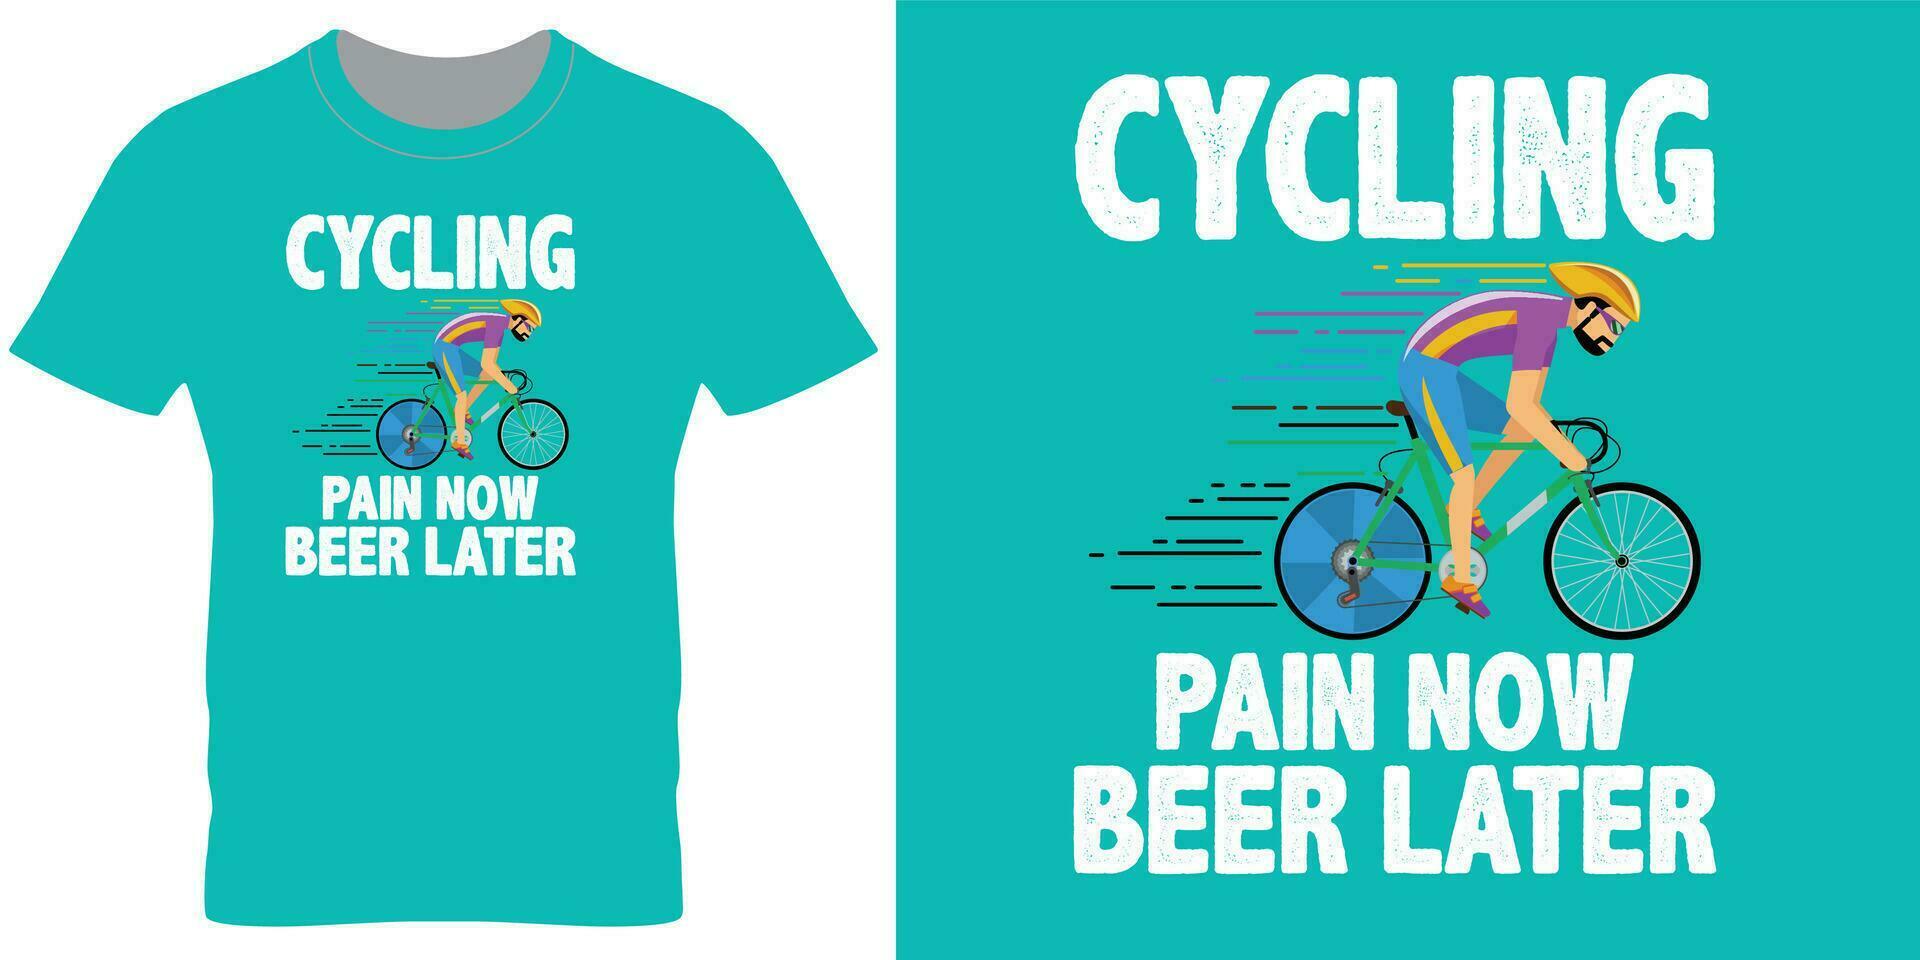 Cycling pain now beer later a tshirt print design vector